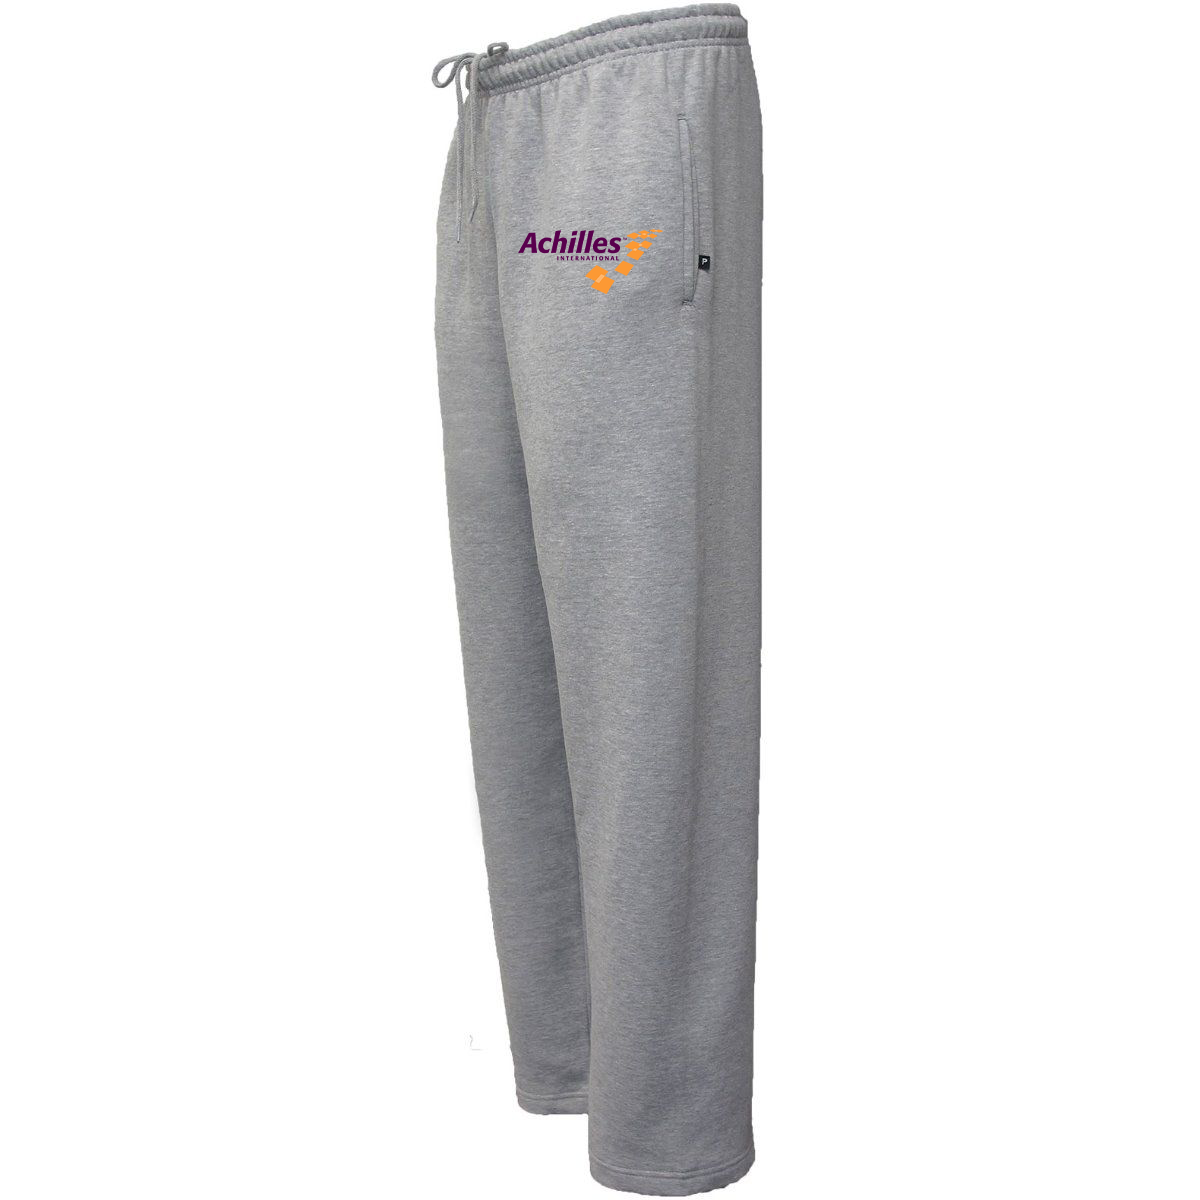 Houghton Athletic Sweatpants - The Highlanders Shop